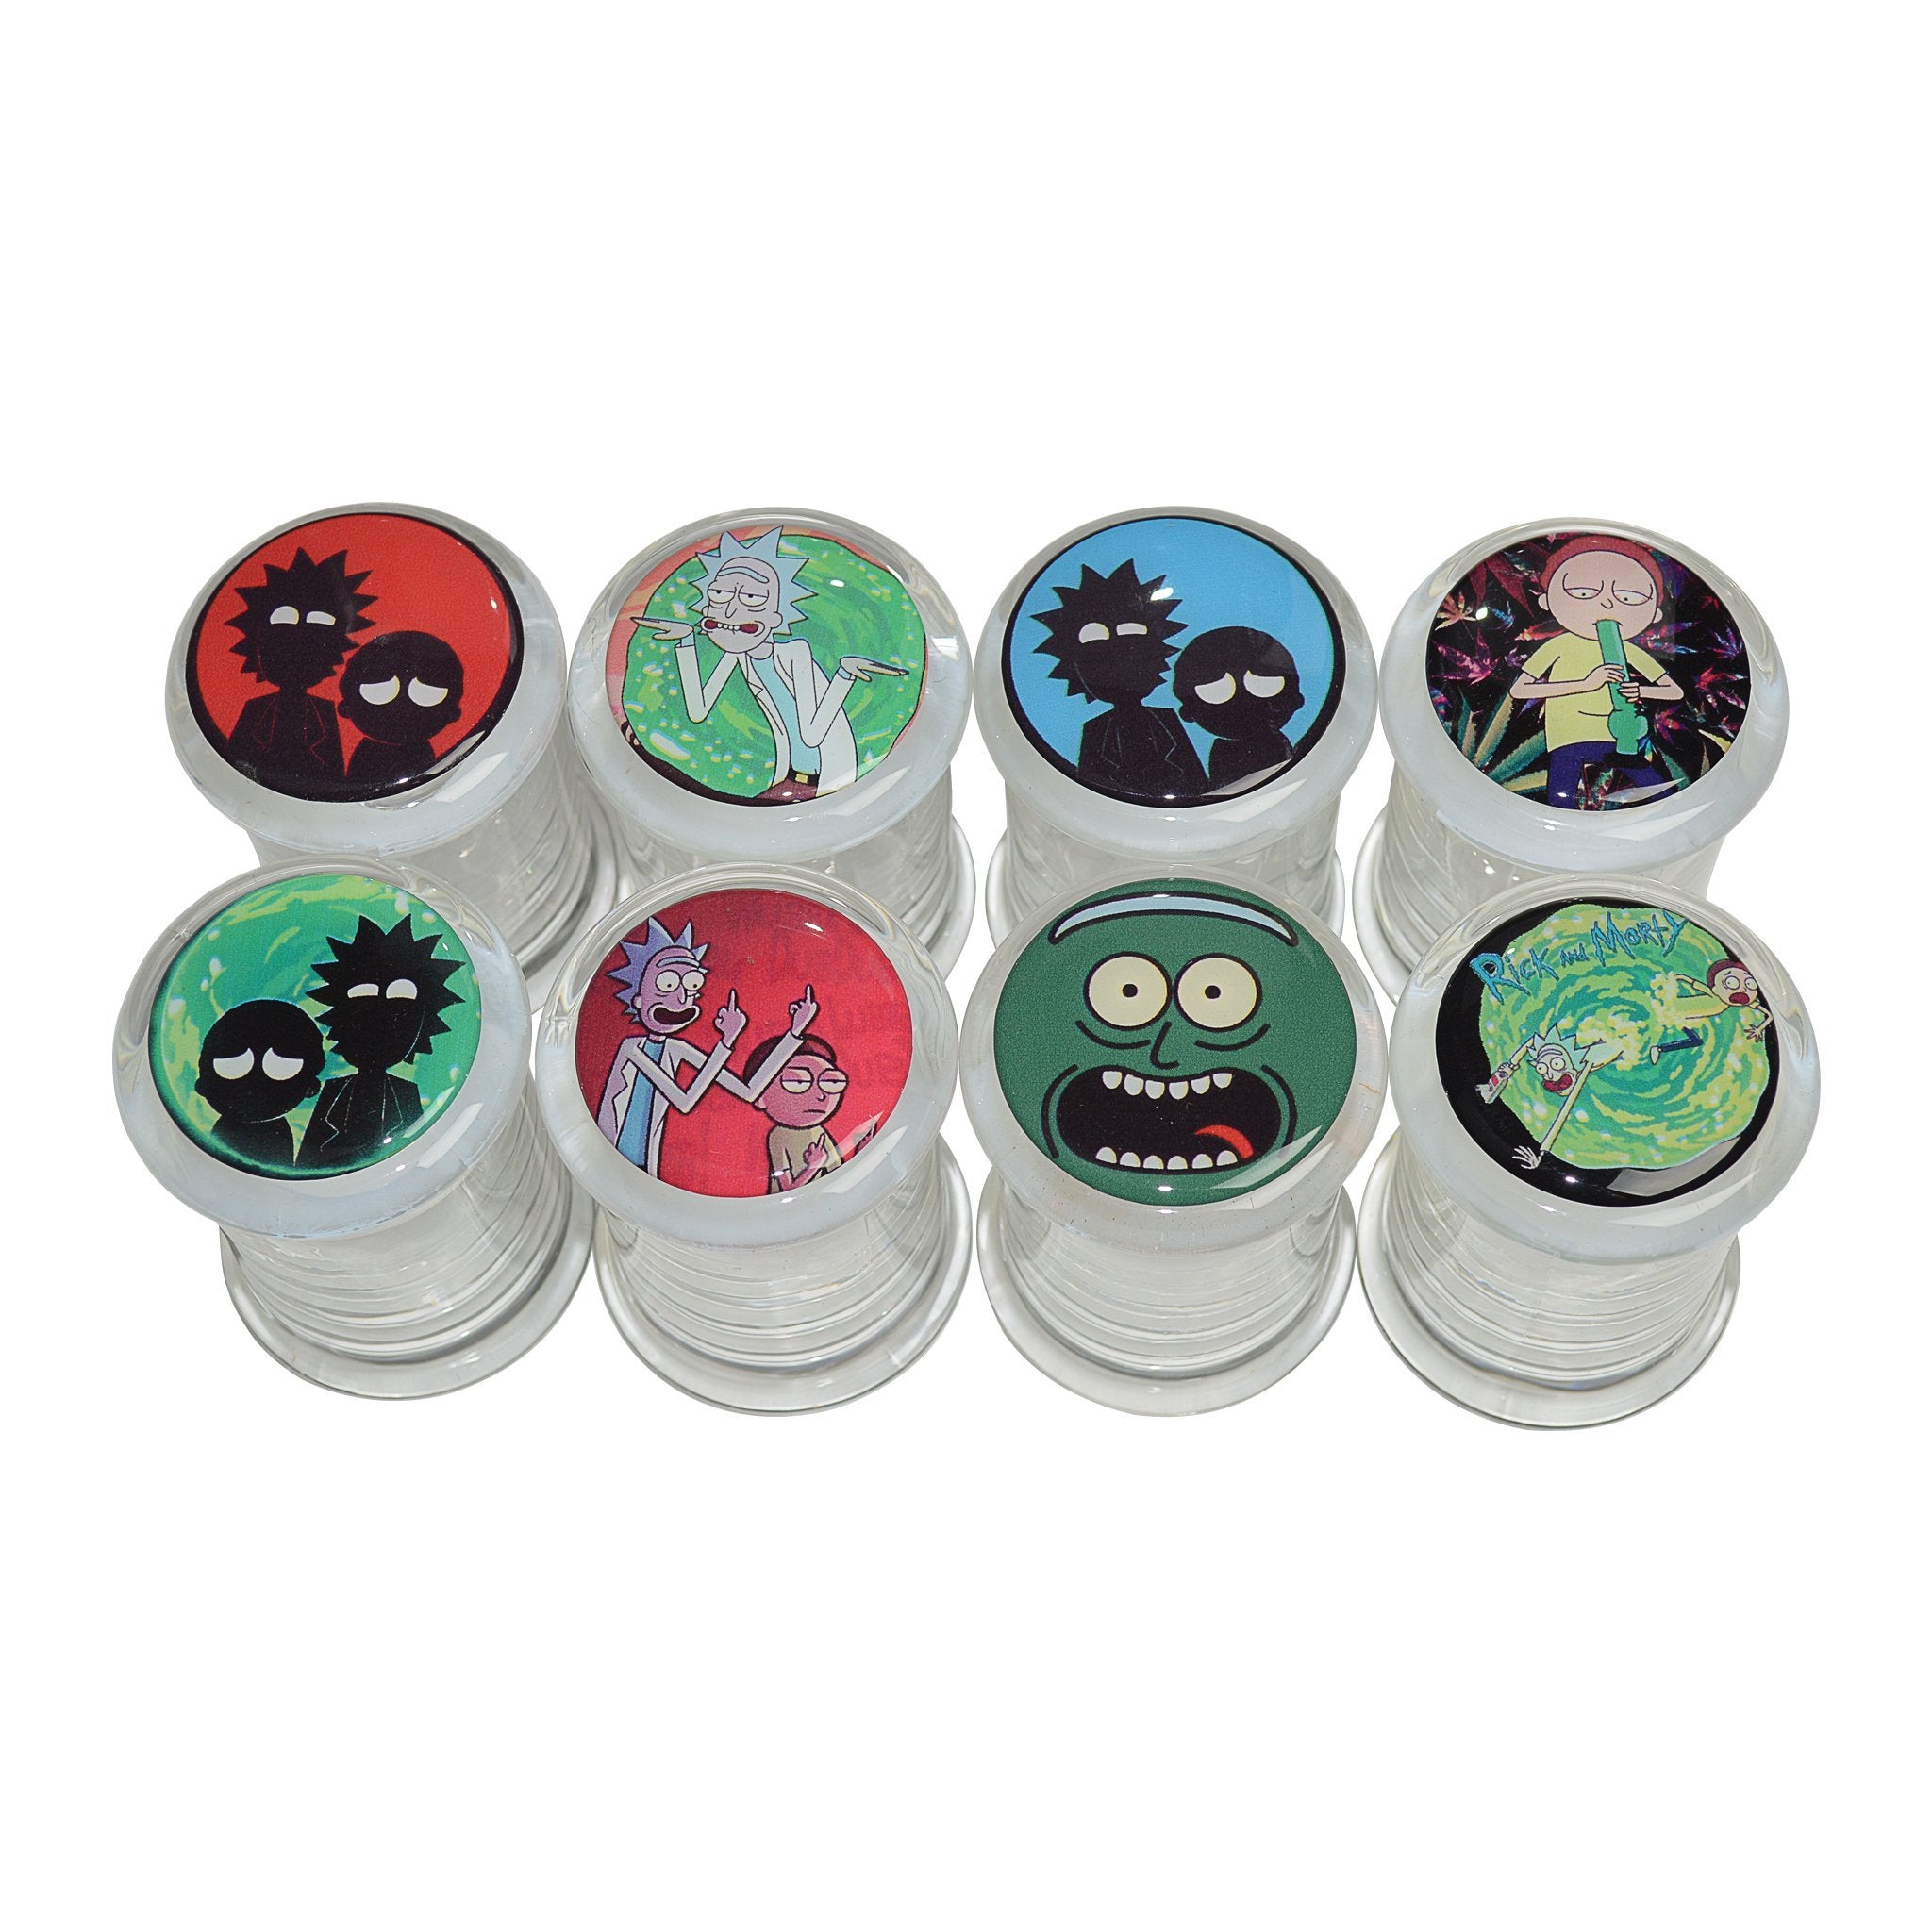 Functional clear glass stash jar storage container fun exciting secure lids with Rick and Morty sticker